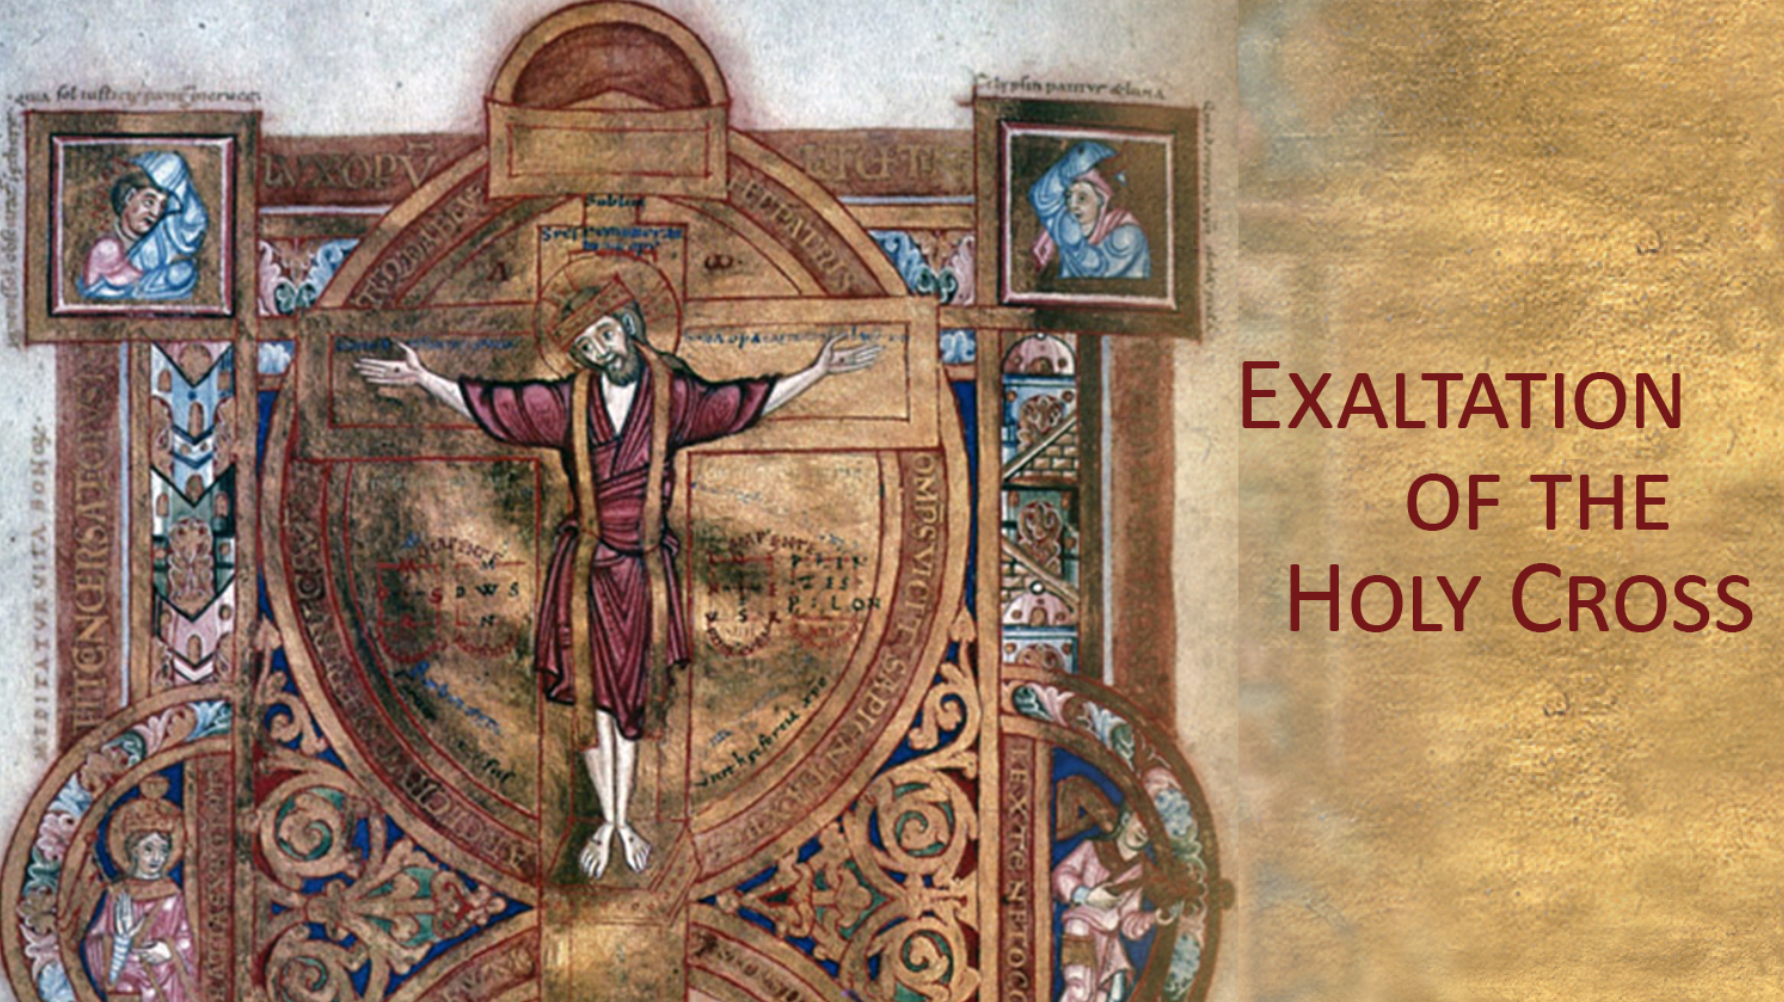 The feast of the Exaltation of the Holy Cross